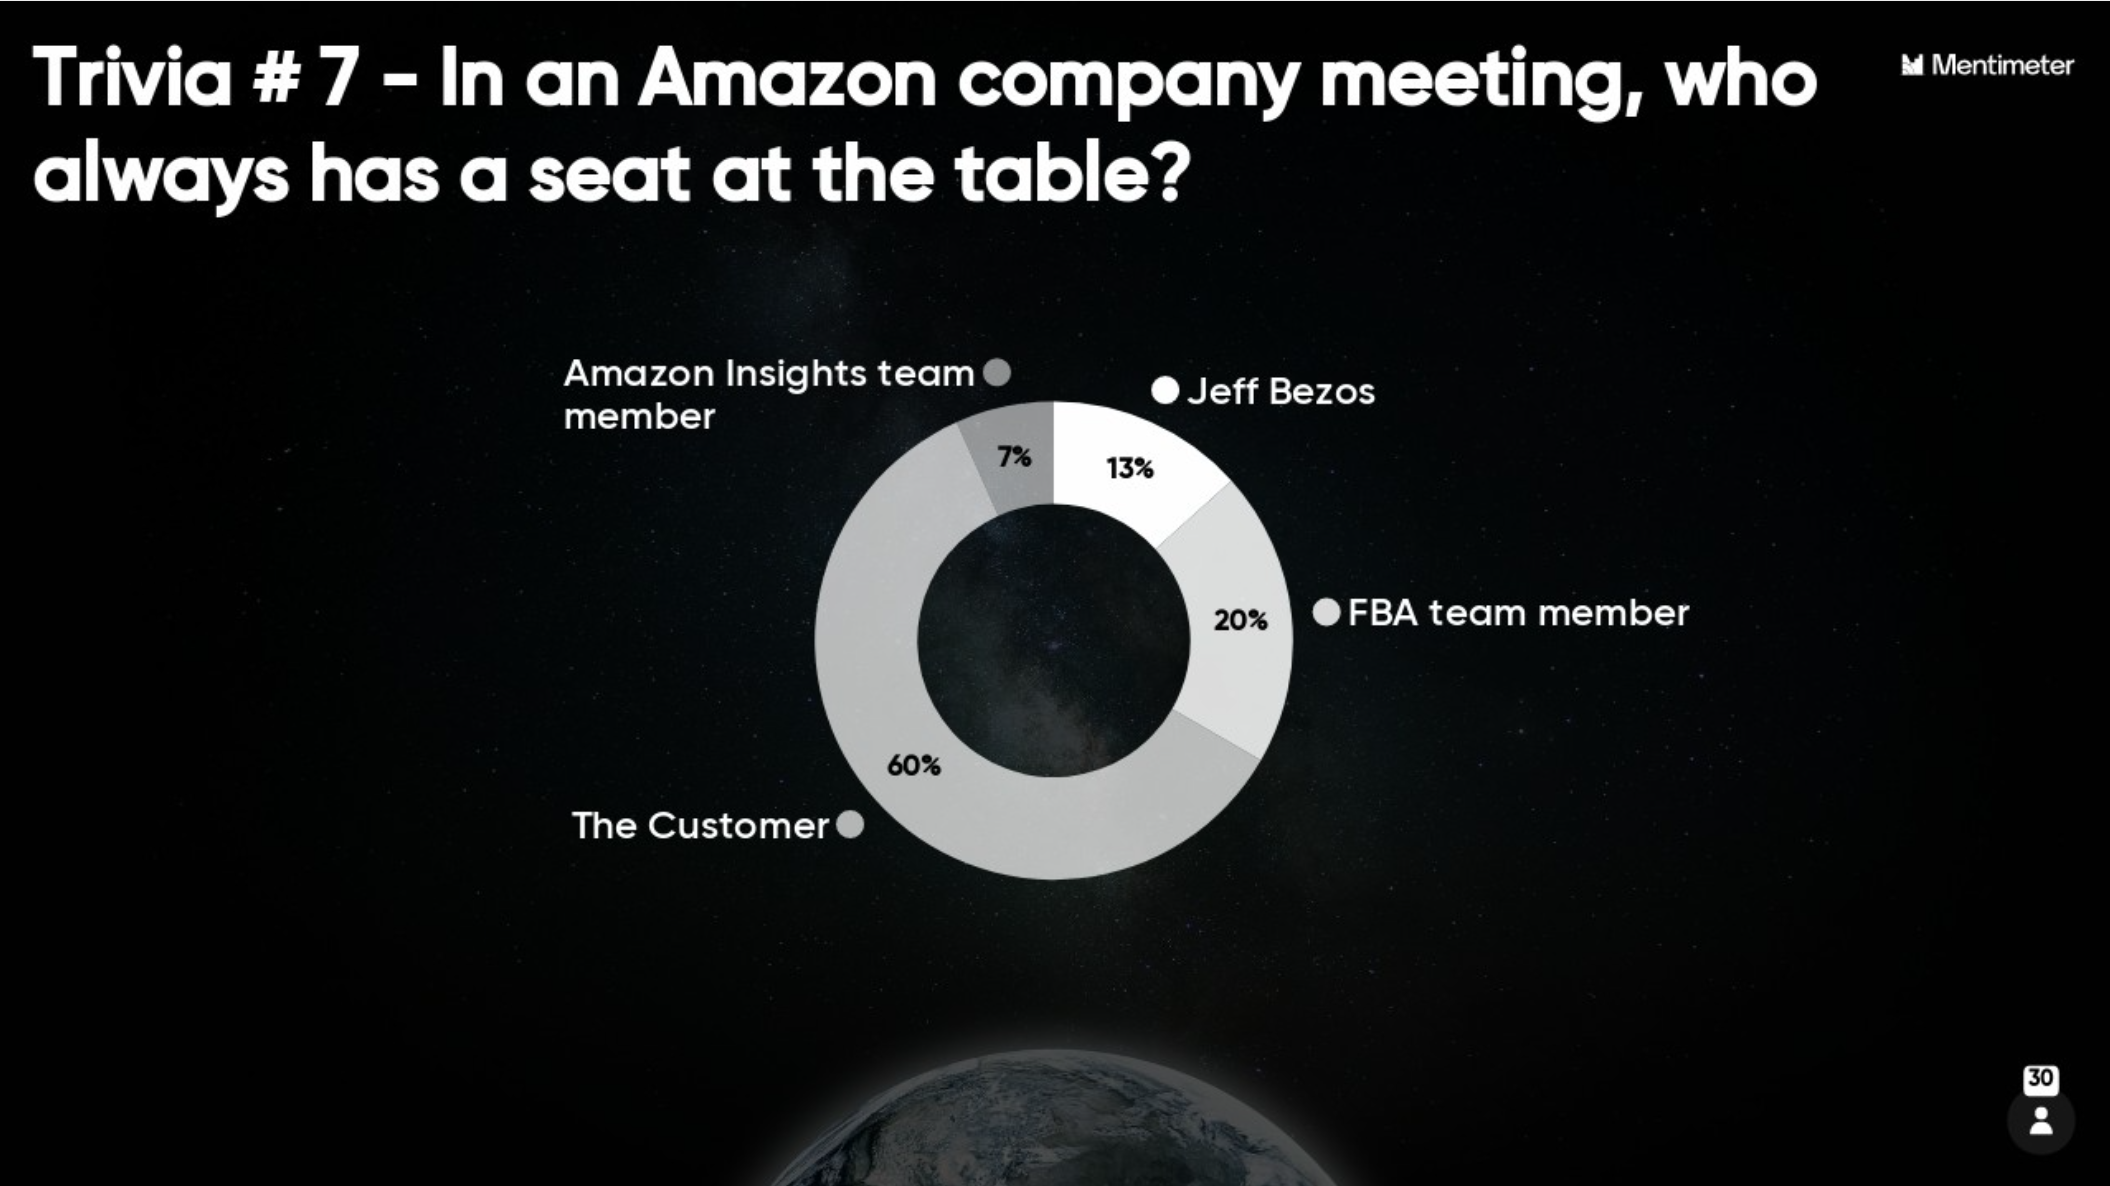 Trivia: In an Amazon company meeting, who always has a seat at the table?